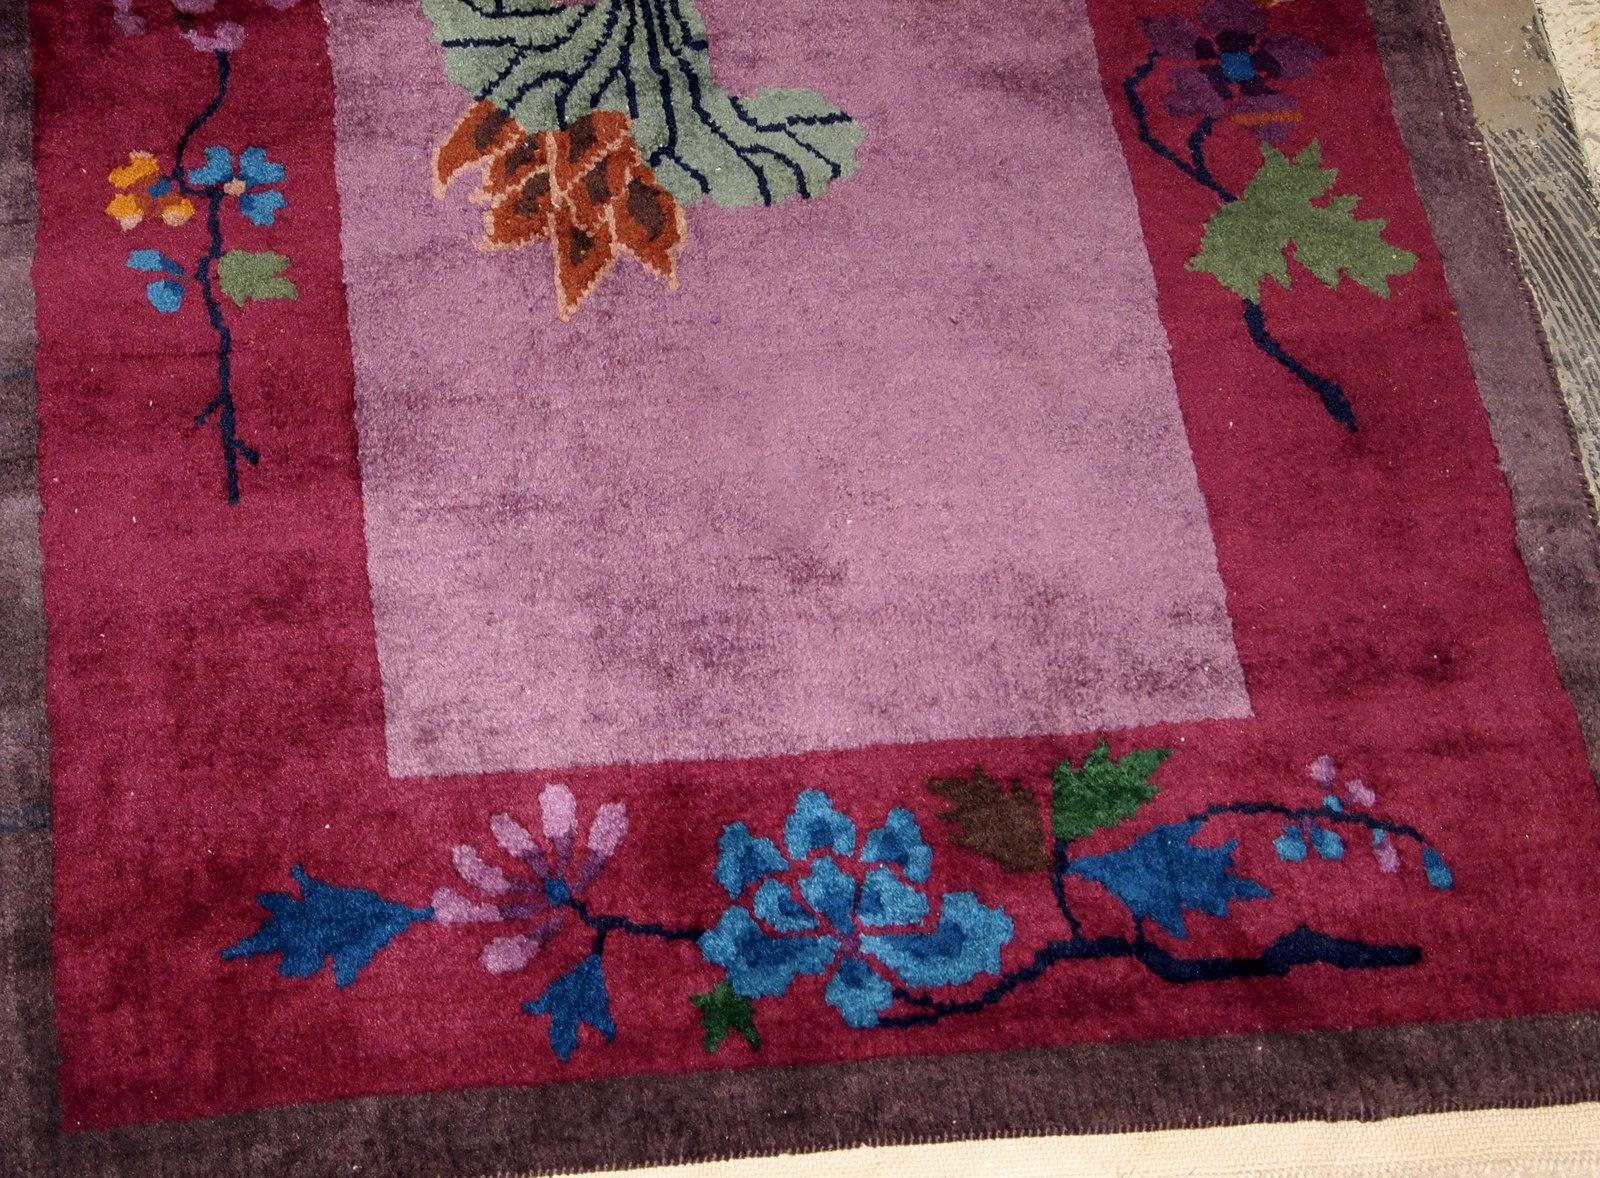 Handmade antique Art Deco Chinese rug in purple shade. The rug has some bright shades of green, blue and brown as well. It is in original good condition. 

- Condition: Original good,

- circa 1920s,

- Size: 2.7' x 4.4' (82 cm x 134 cm),

-